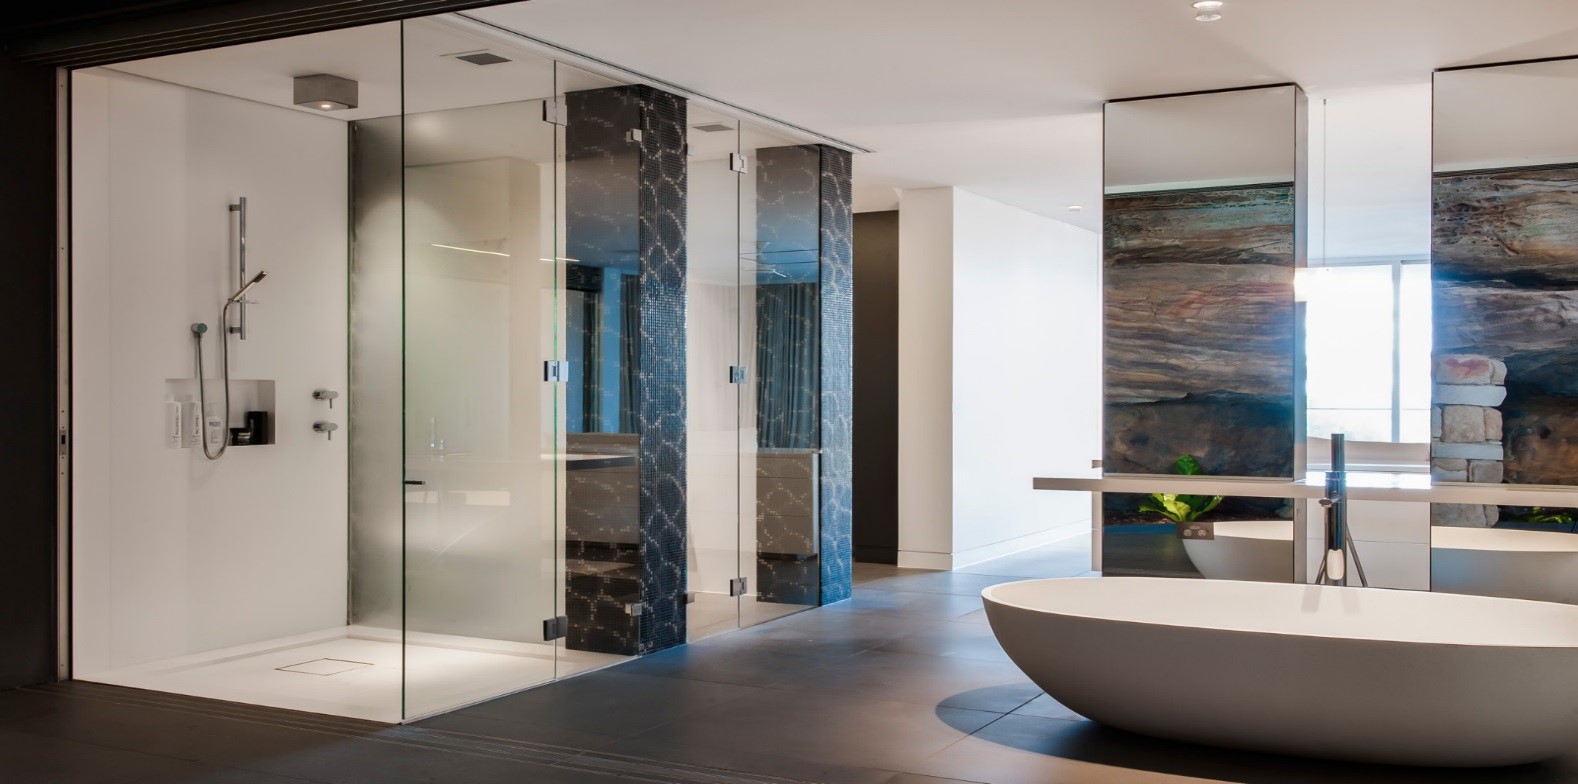 Luxurious Sydney Residence An Interior Delight Corian Solid